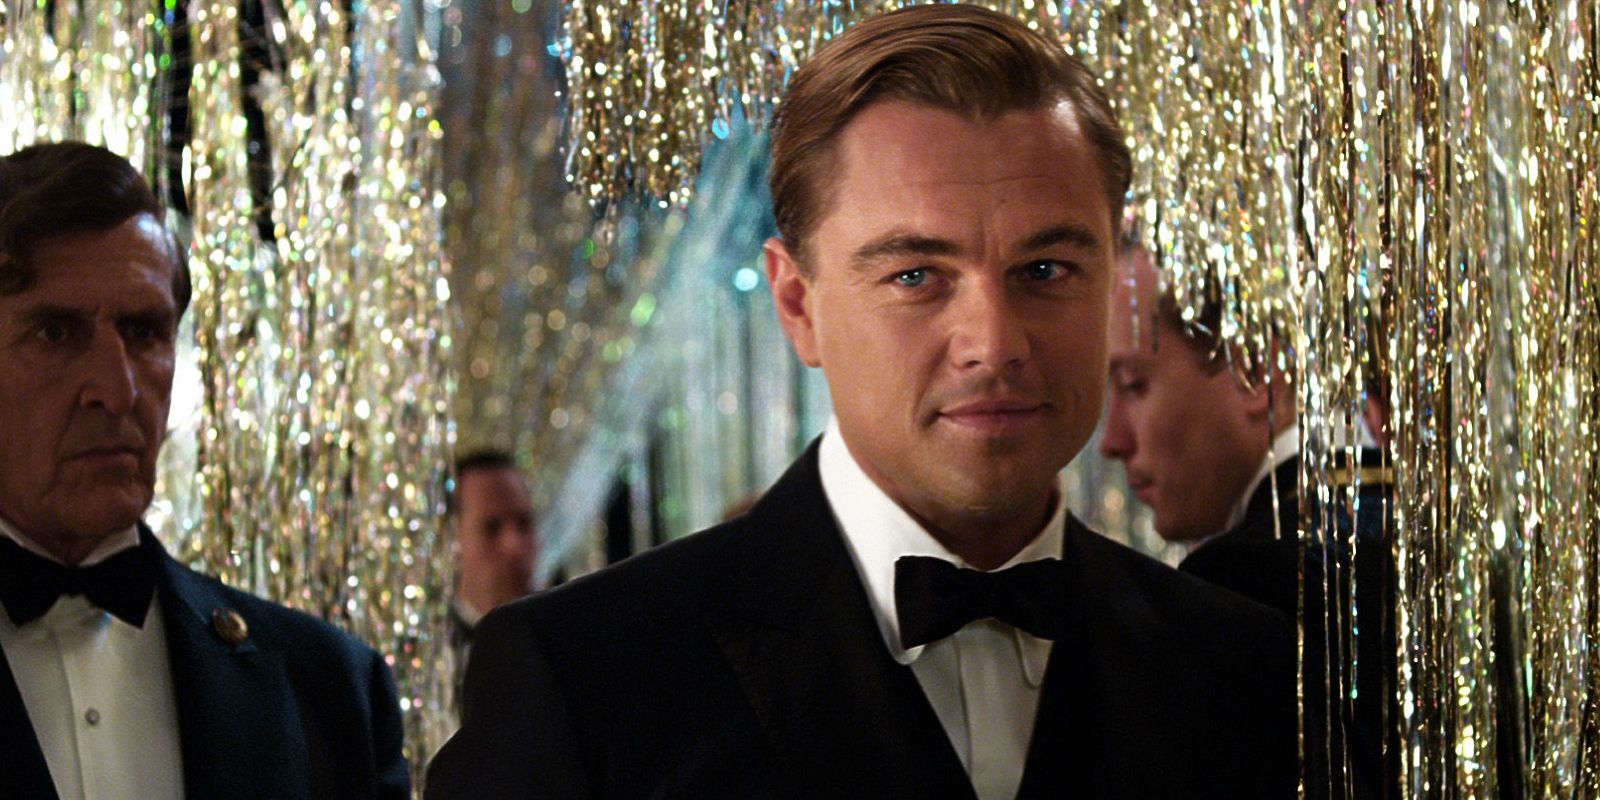 Jay Gatsby at a party in The Great Gatsby movie.